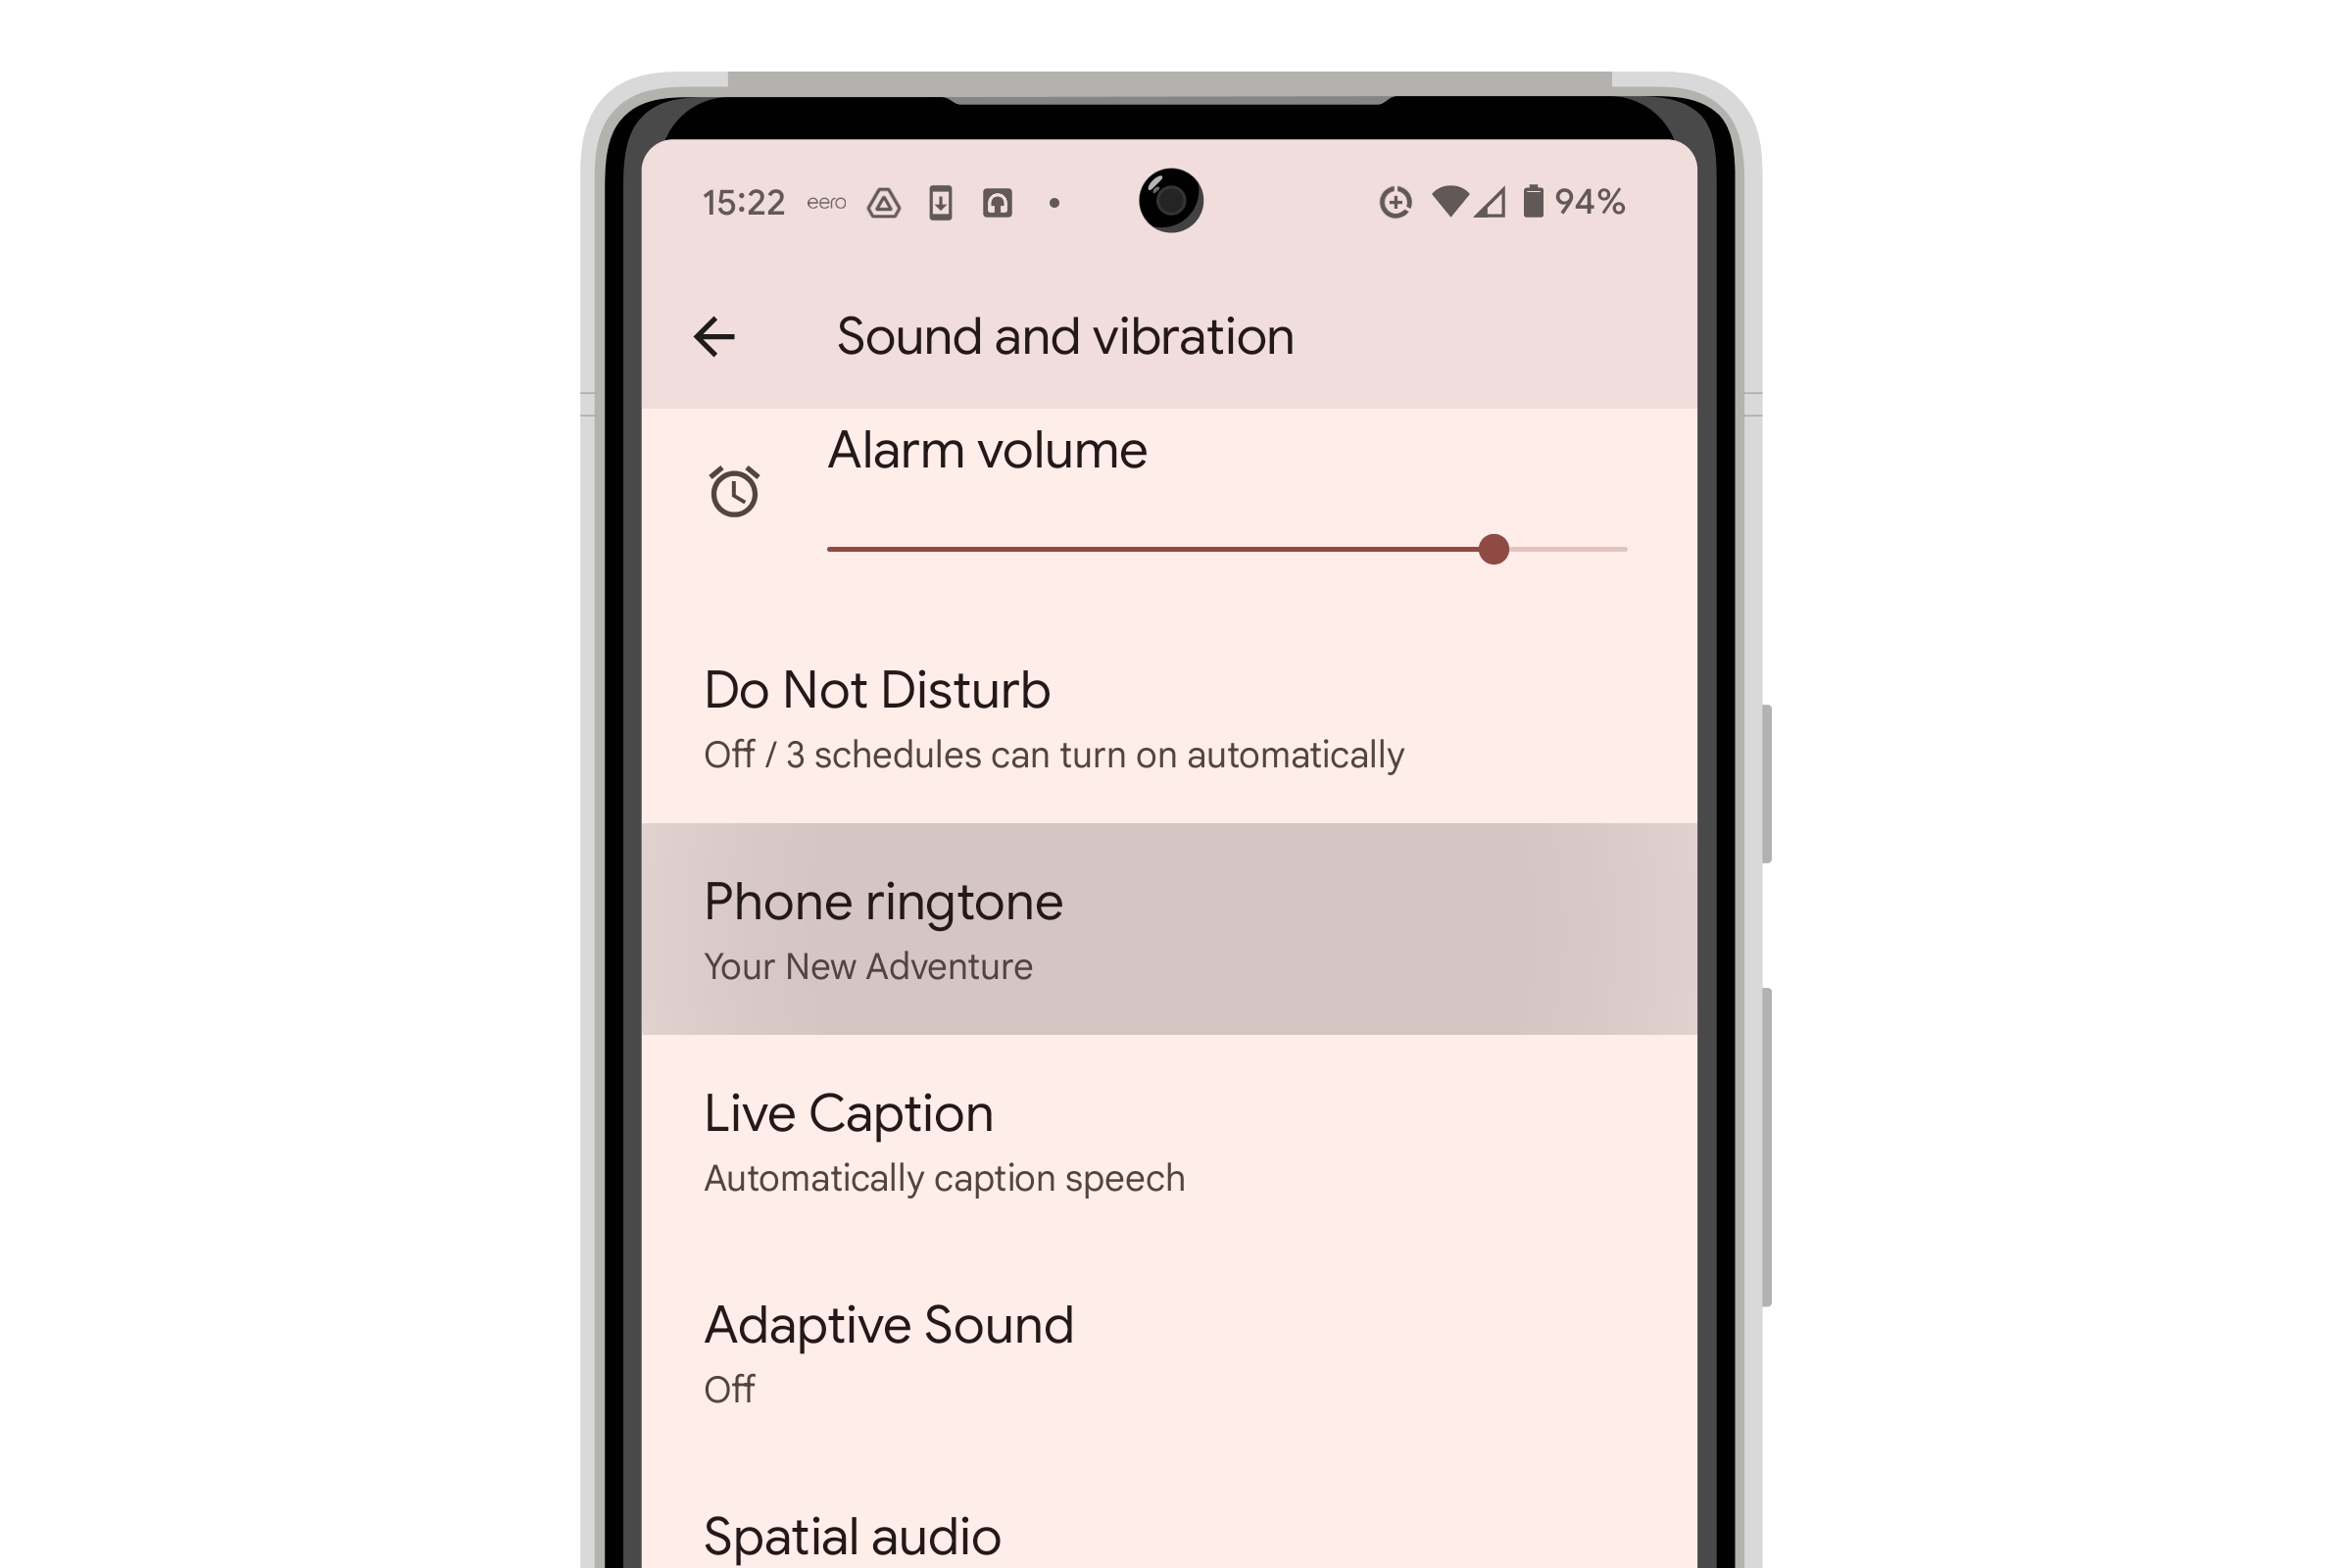 Android 14 Settings with Phone ringtone highlighted.